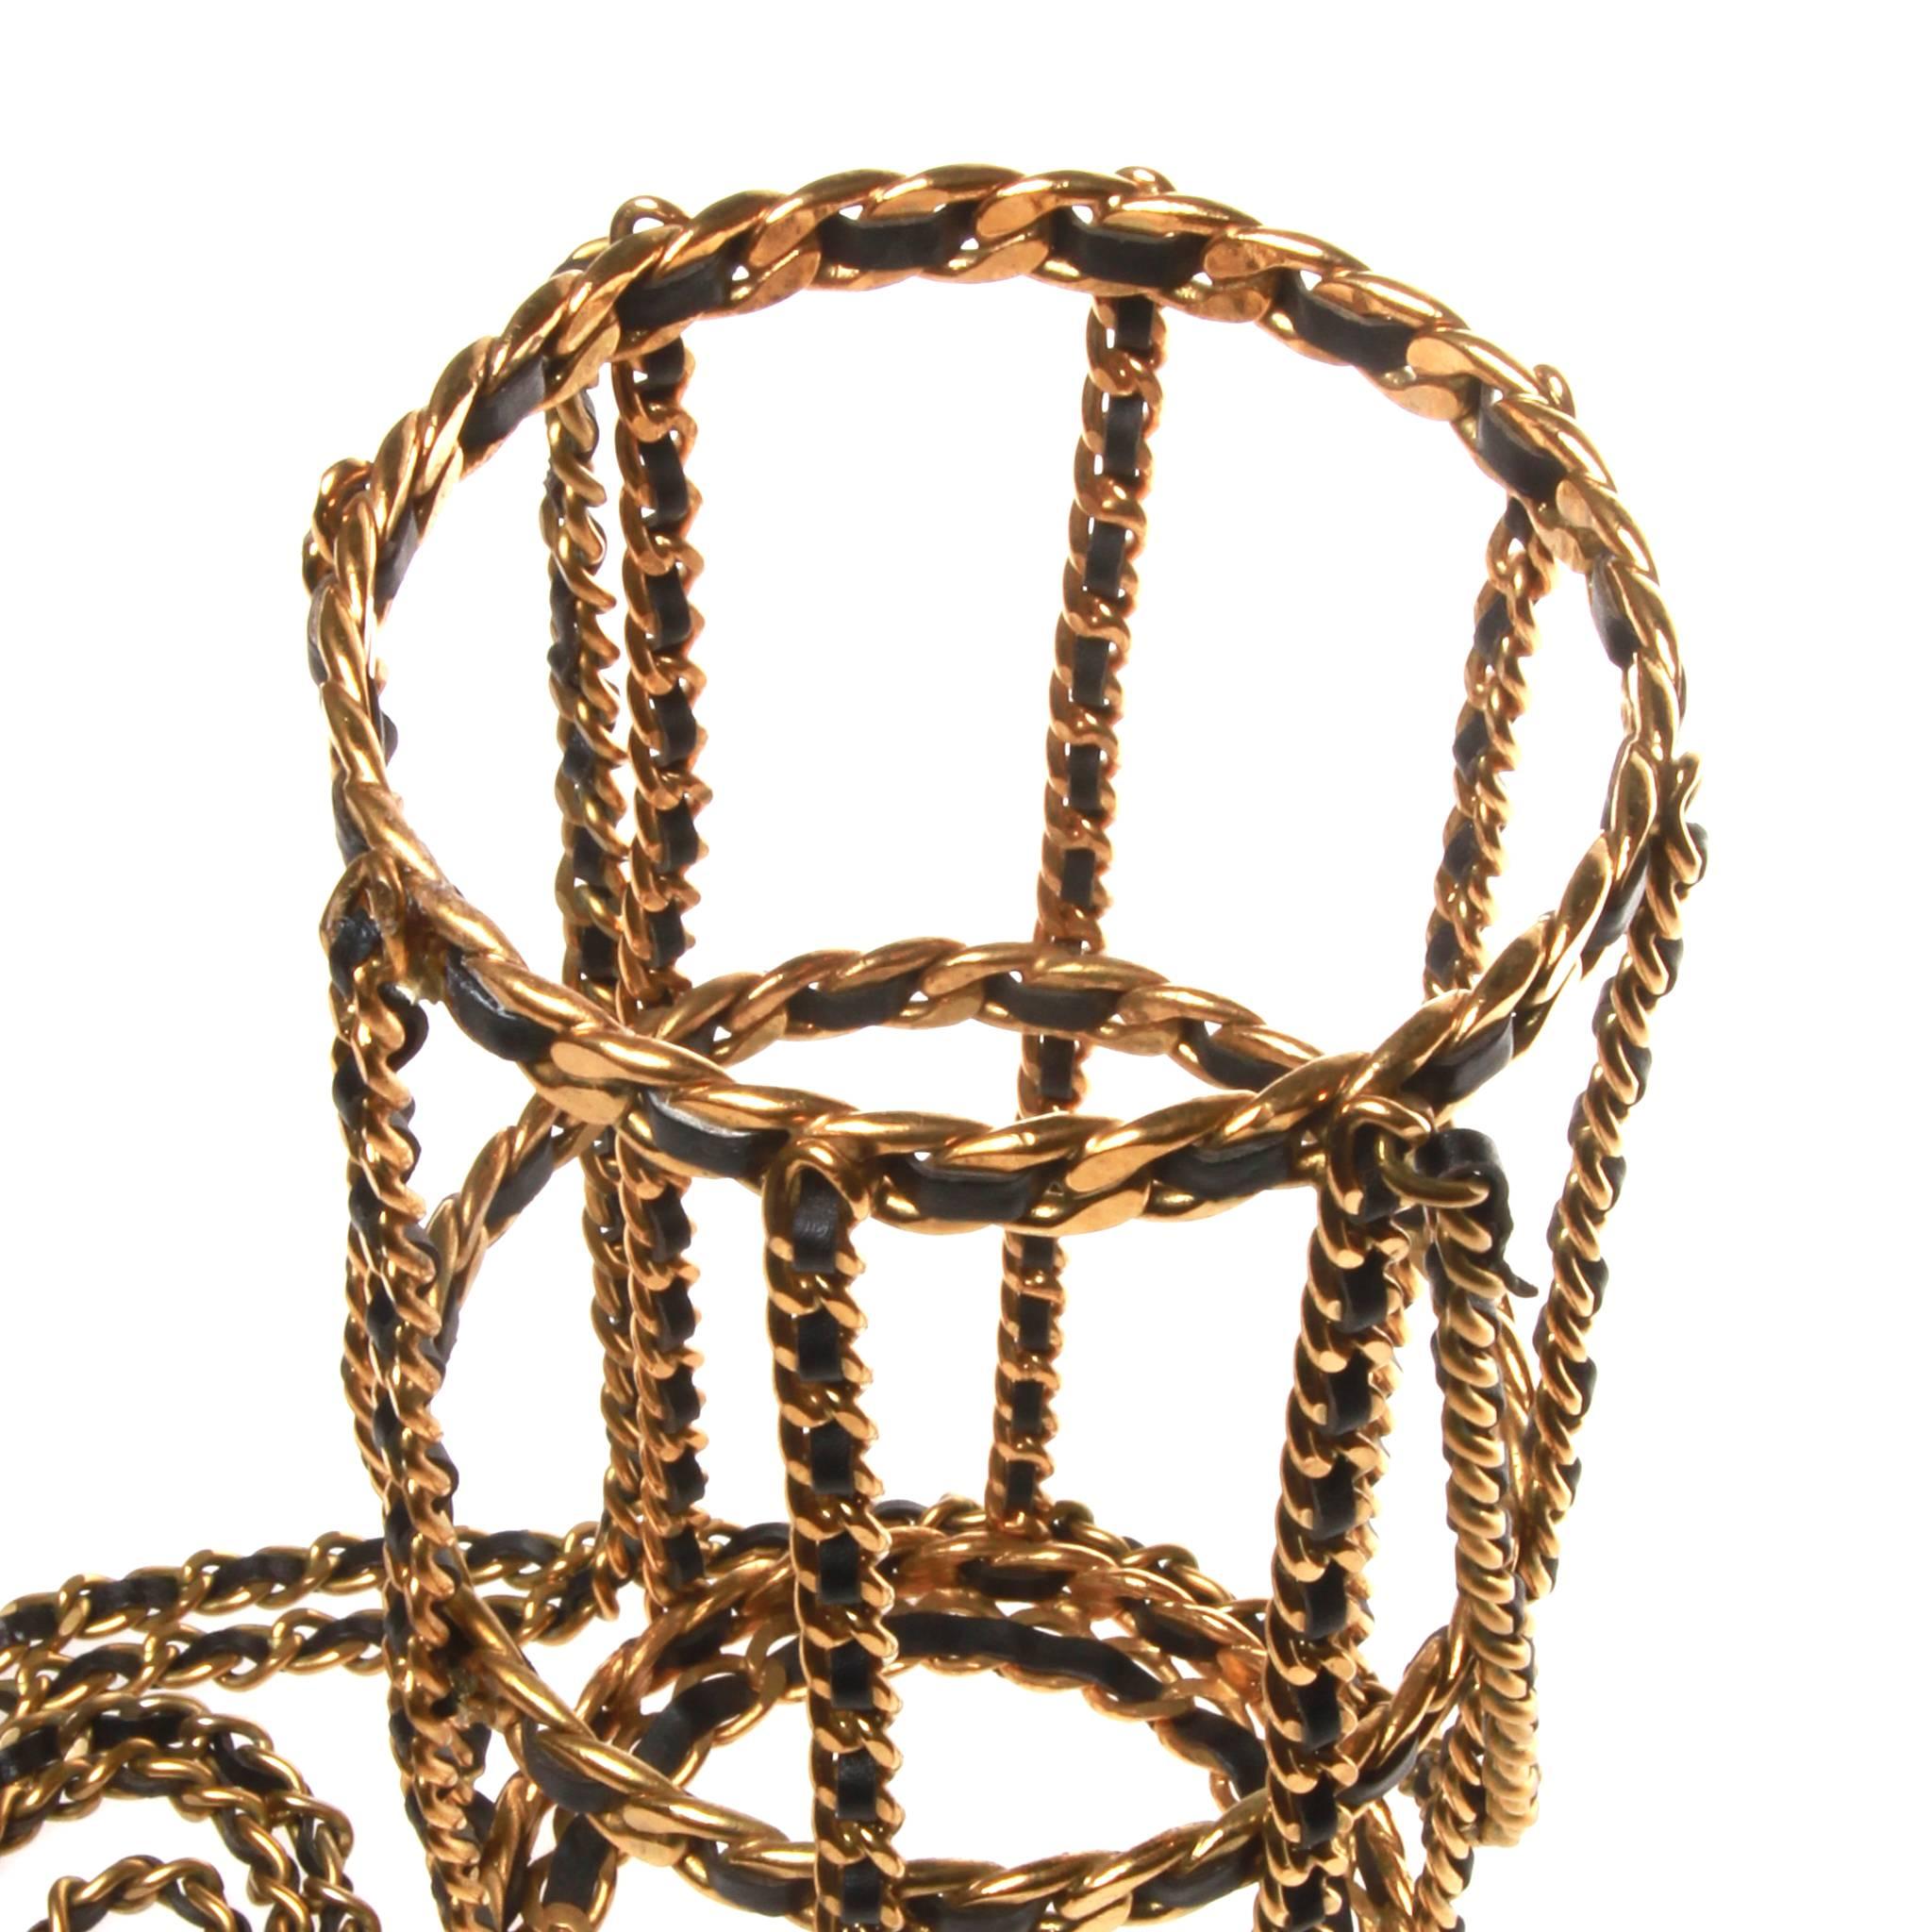 Rare and coveted Chanel Fall 1994 wine bottle holder. Formed of the classic Chanel leather threaded chain, the simple cage design in gold-tone metal and black lambskin features a single bottle holder and shoulder or cross body strap. For the show